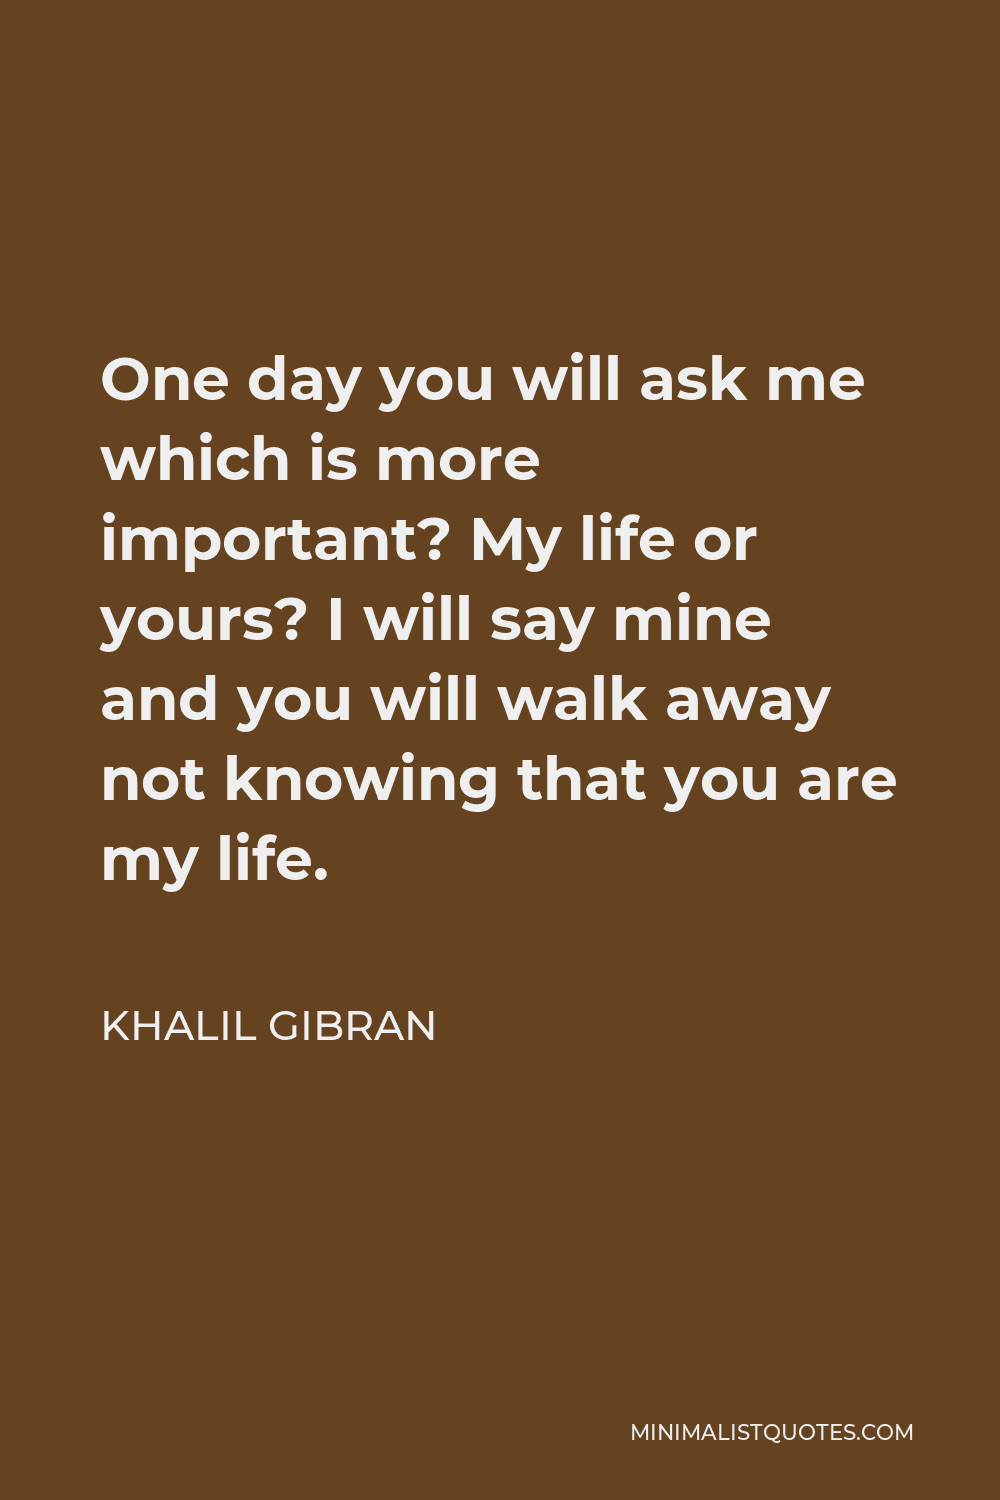 Khalil Gibran Quote - One day you will ask me which is more important? My life or yours? I will say mine and you will walk away not knowing that you are my life.